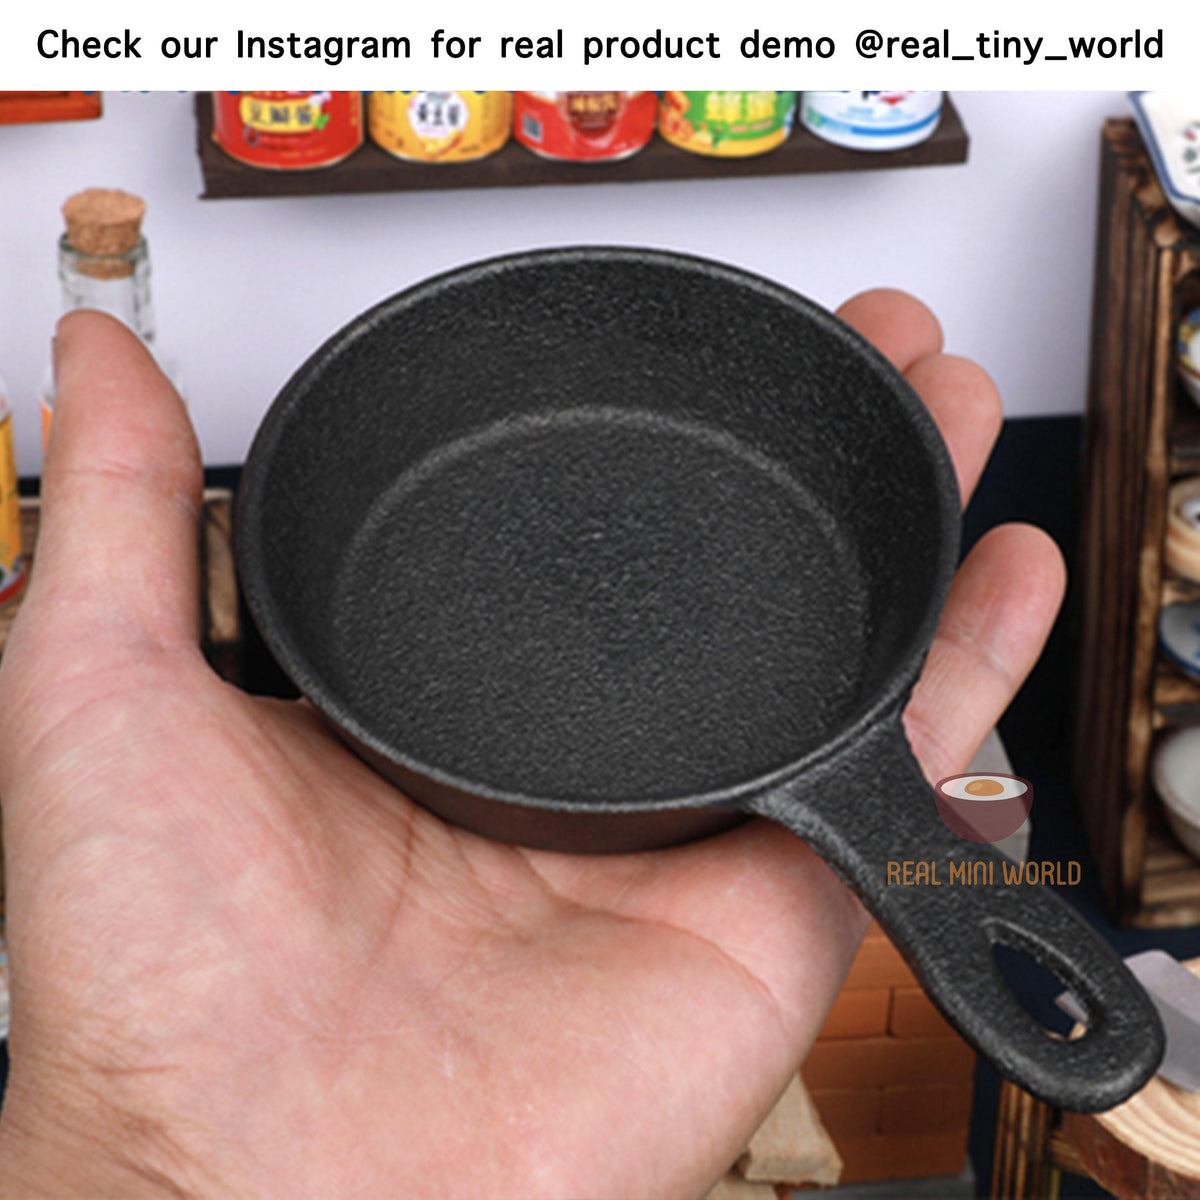 This Mini Frying Pan Is What Small-Kitchen Dreams Are Made Of